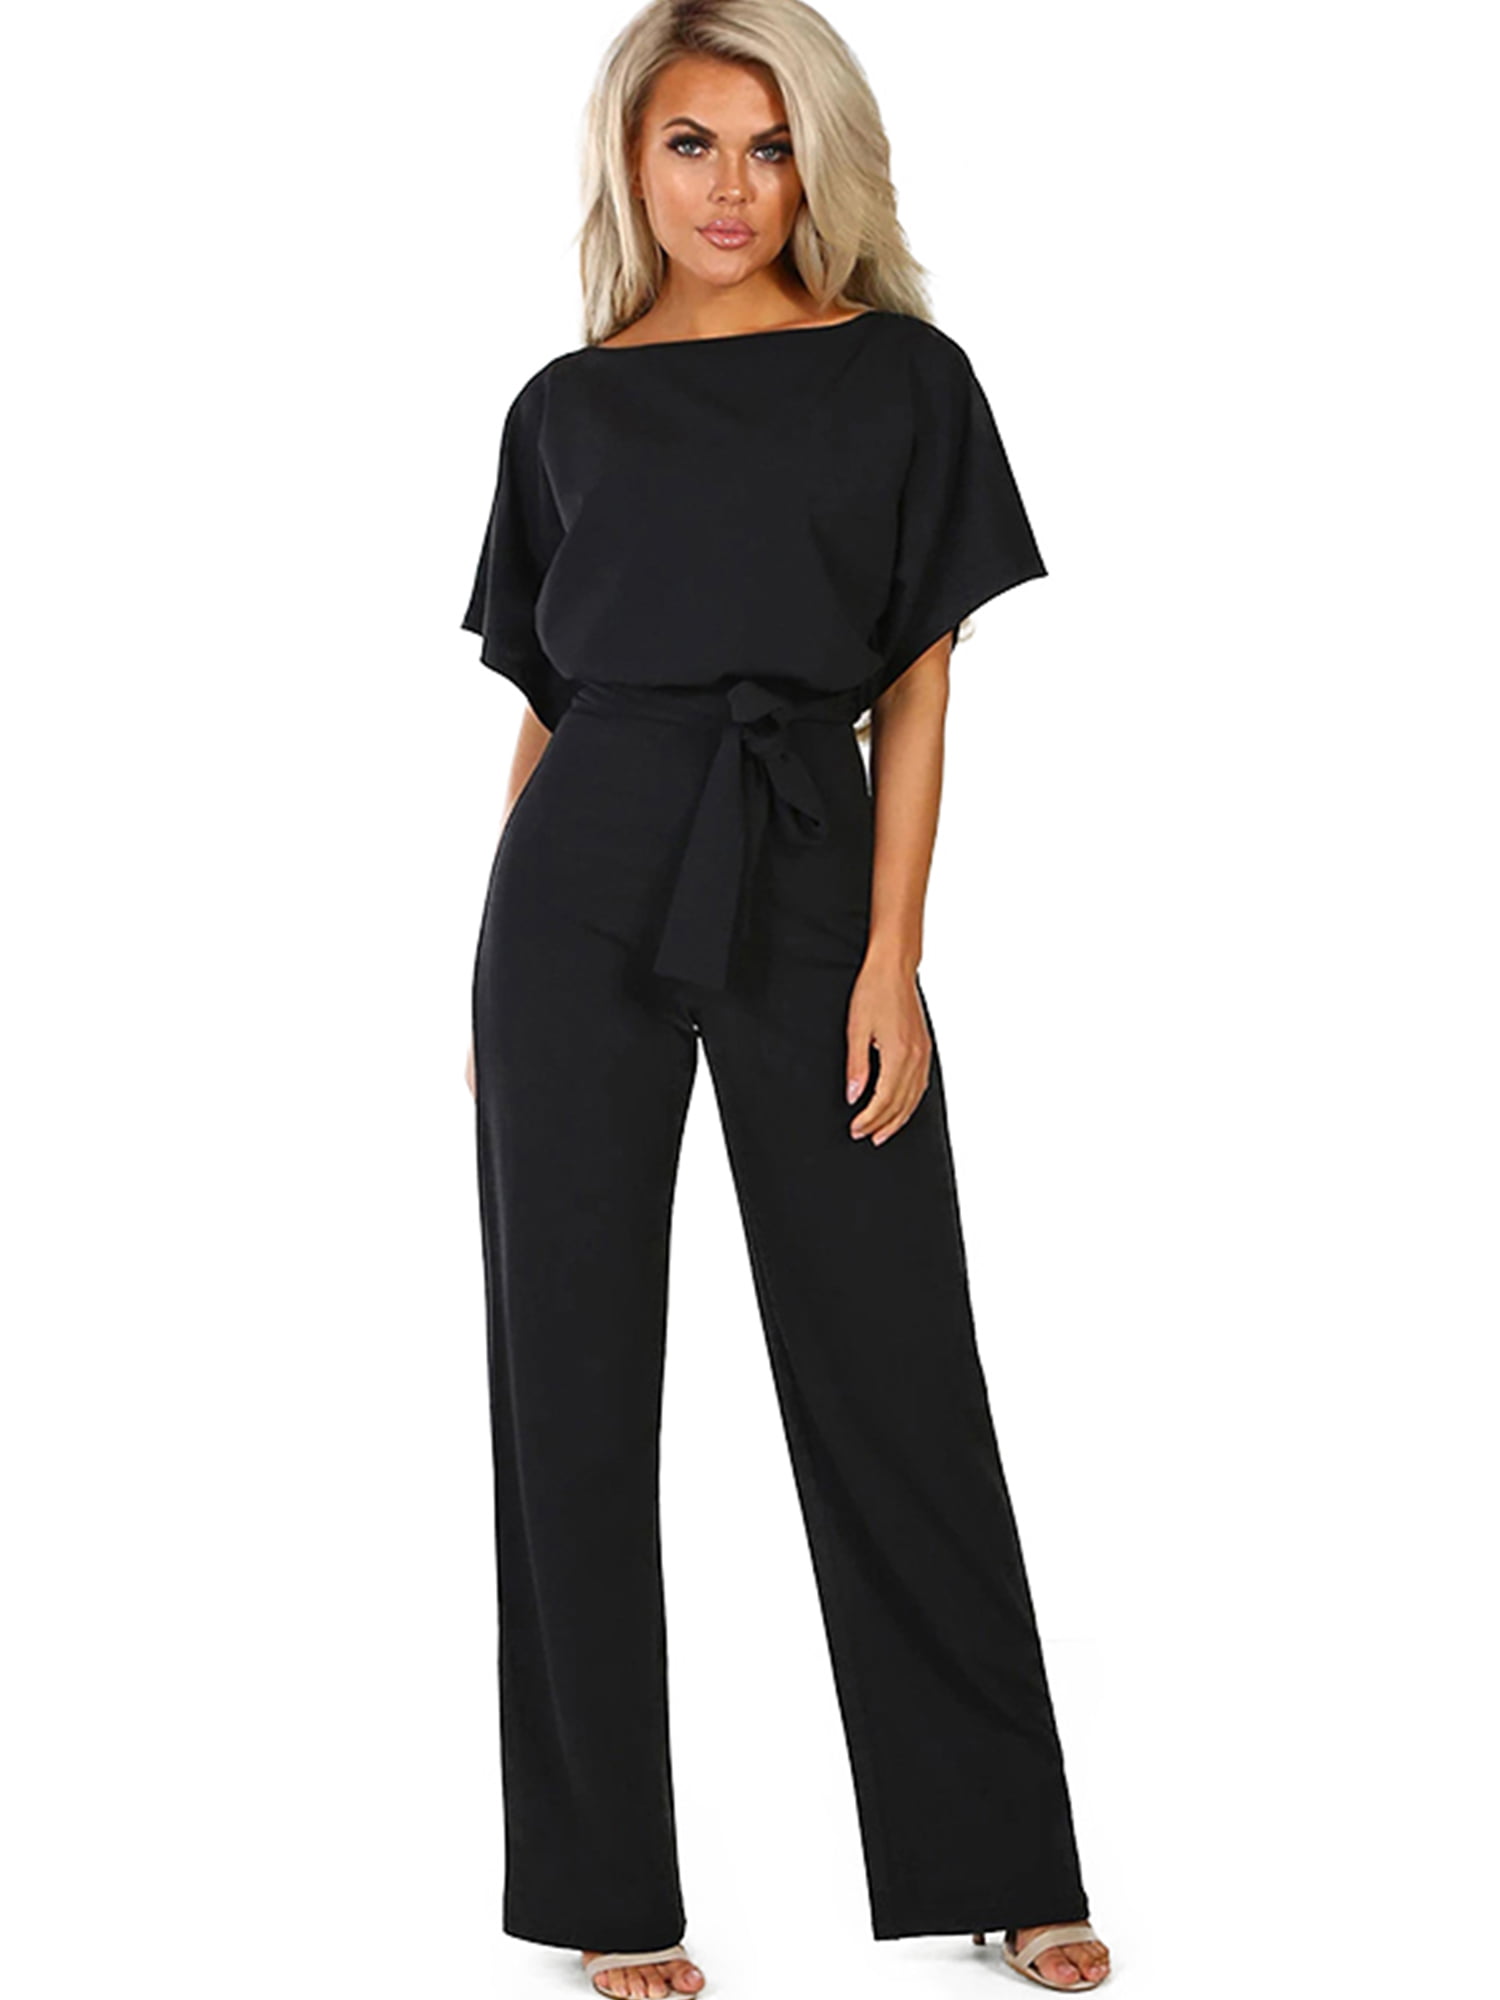 Women's Casual Playsuits Wide Leg Trousers Rompers Solid Short Sleeve Jumpsuit 